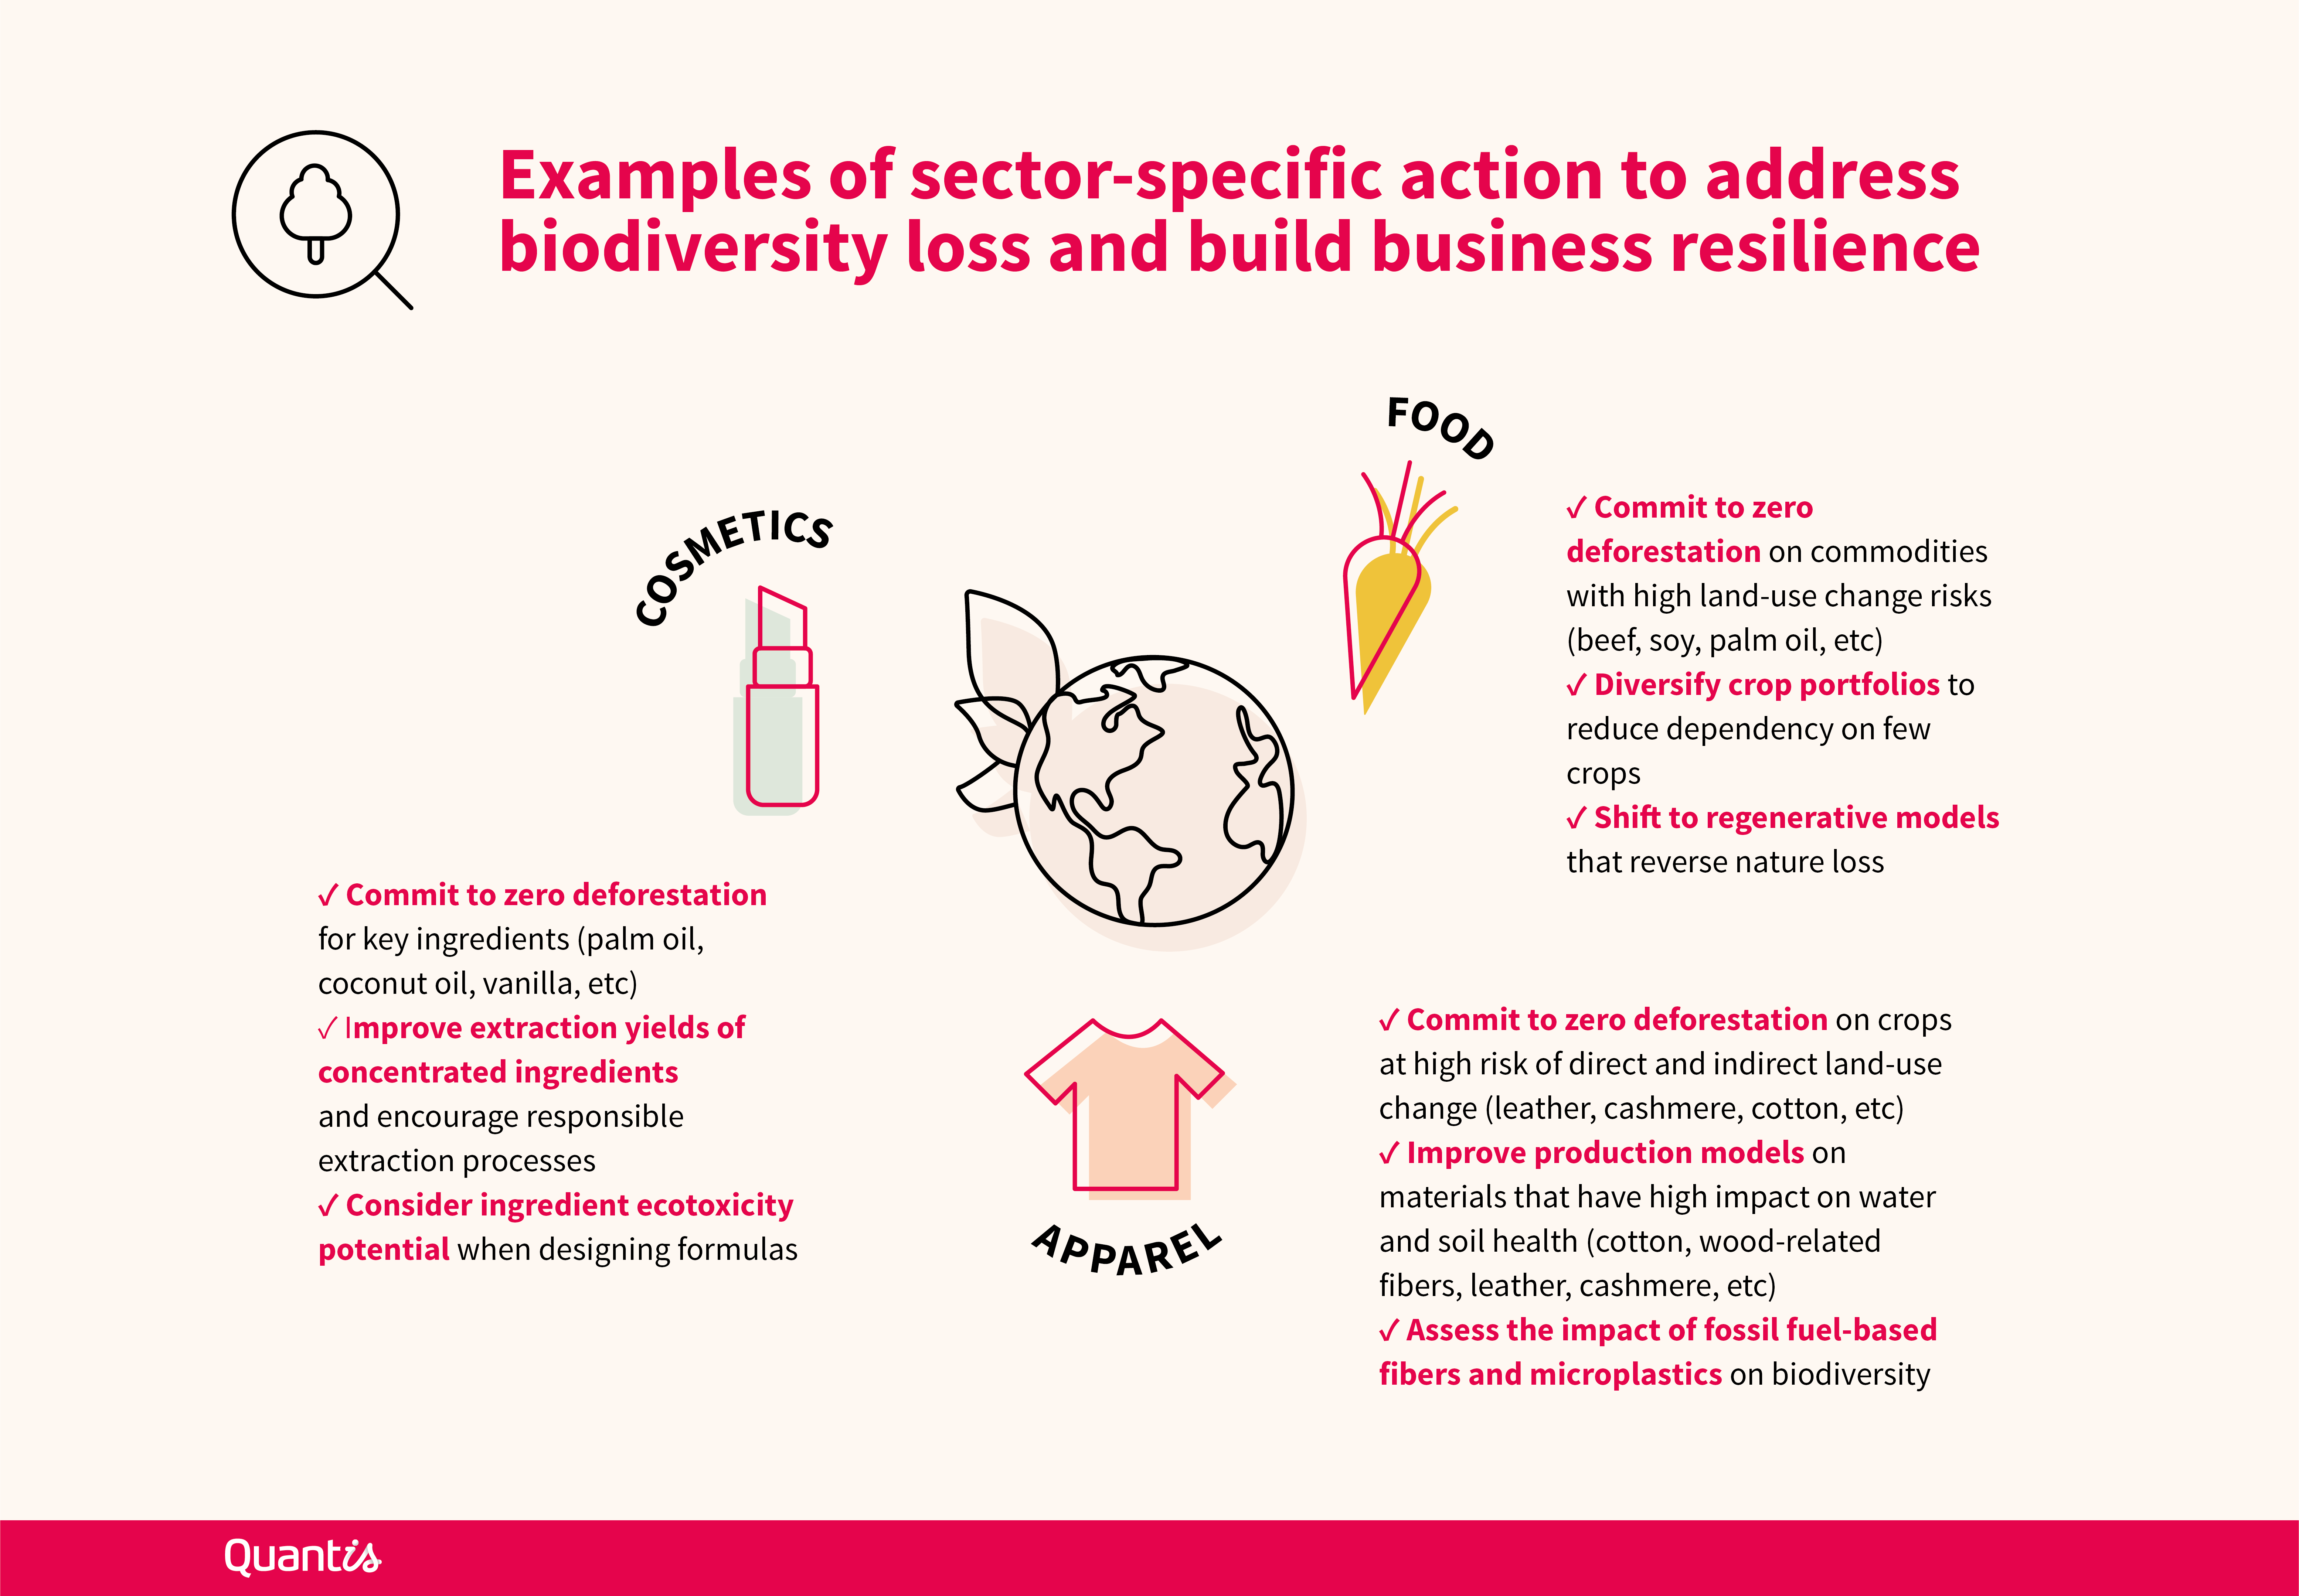 Examples of sector-specific action to address biodiversity loss and build business resilience